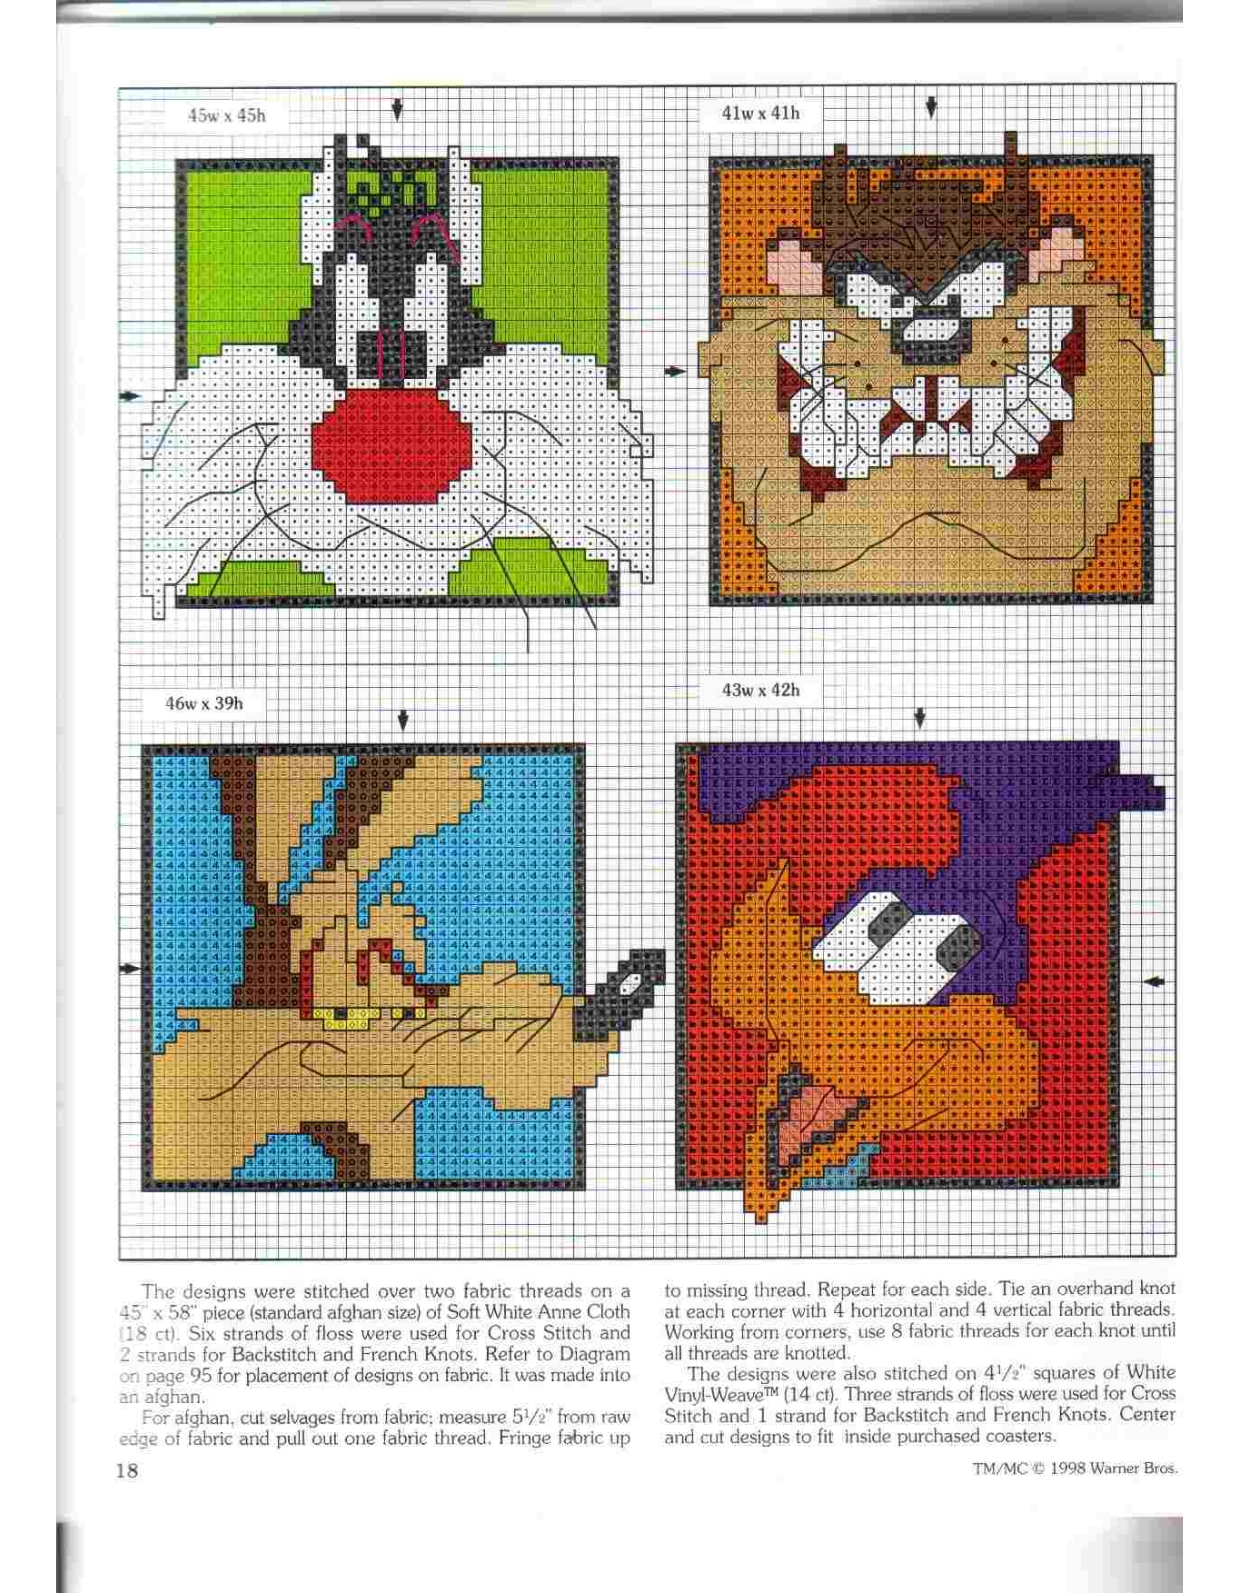 Cross stitch squares with Sylvester the cat Taz Wile Coyote and Road Runner